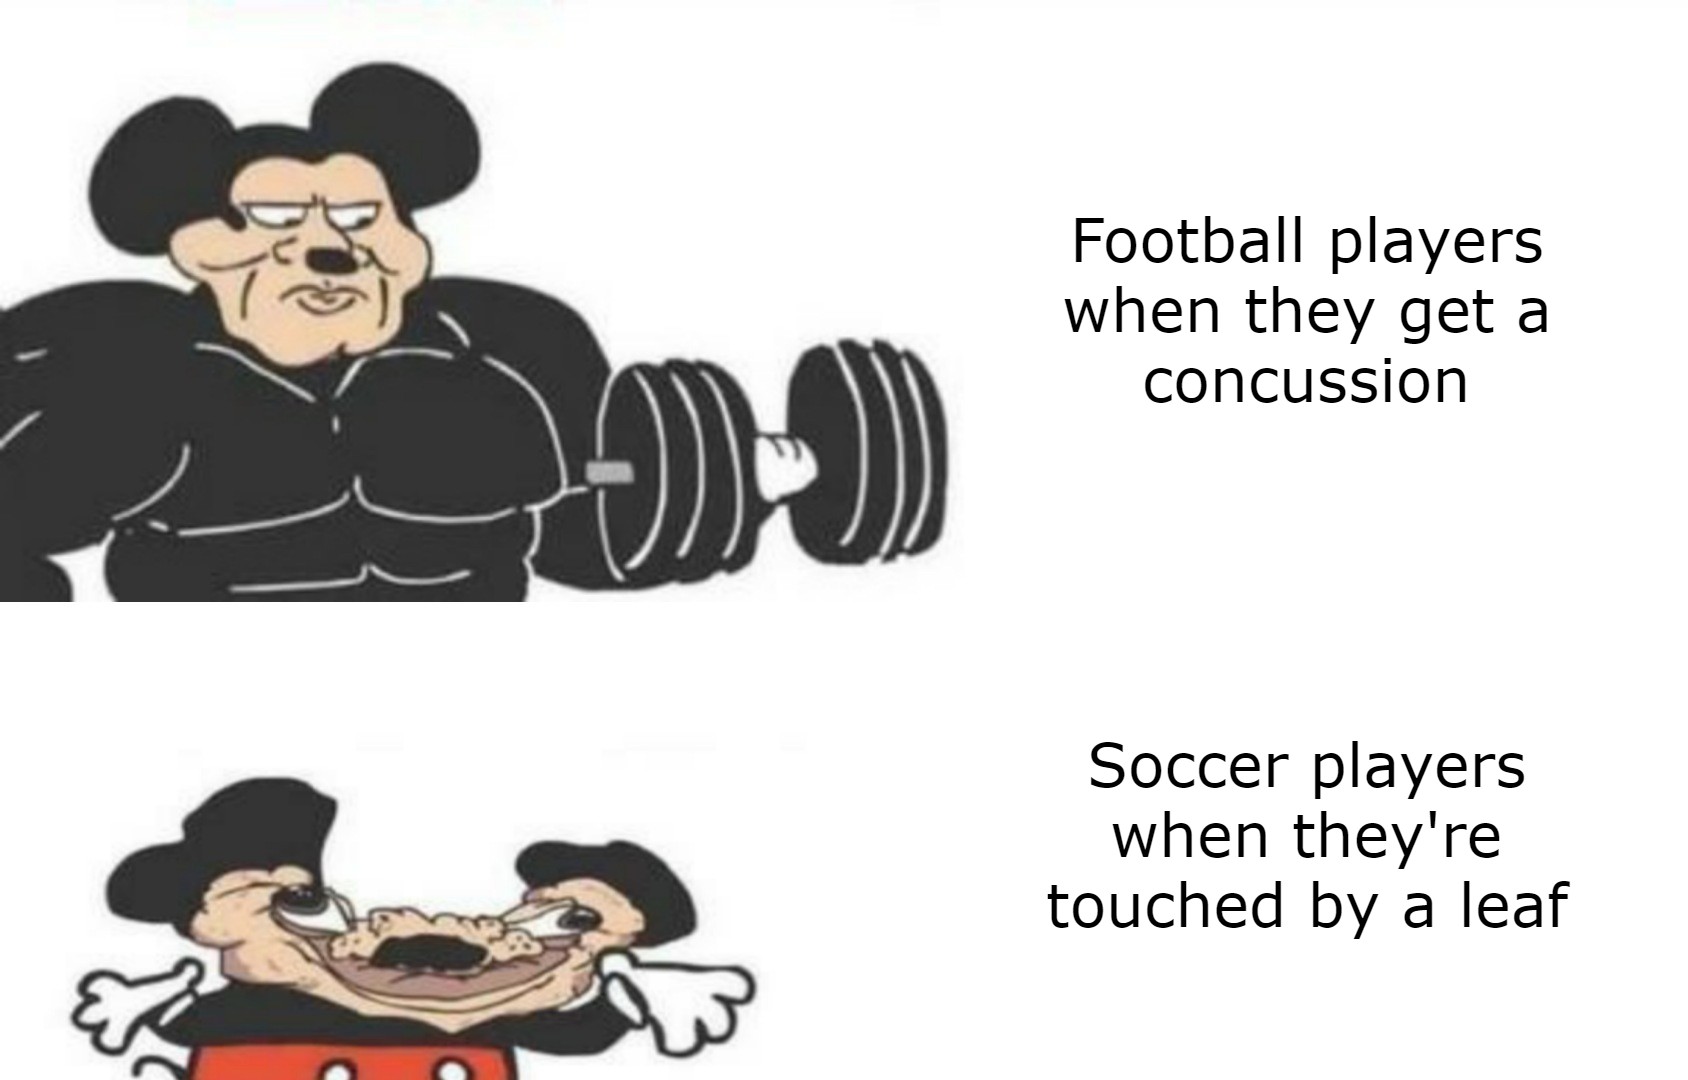 funny and dank memes - cartoon - Football players when they get a concussion Soccer players when they're touched by a leaf